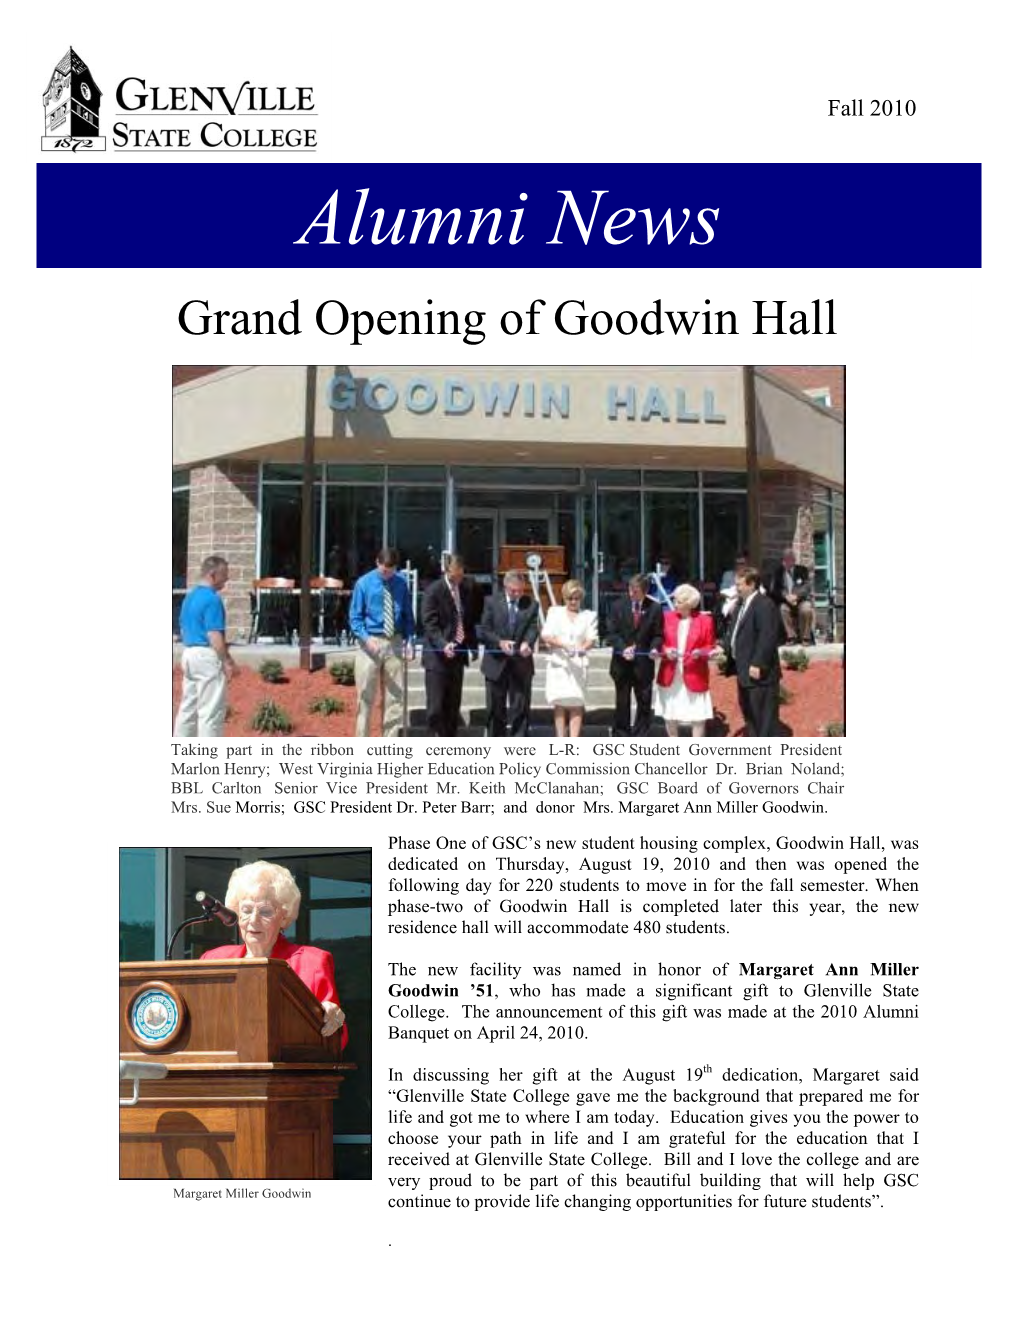 Grand Opening of Goodwin Hall